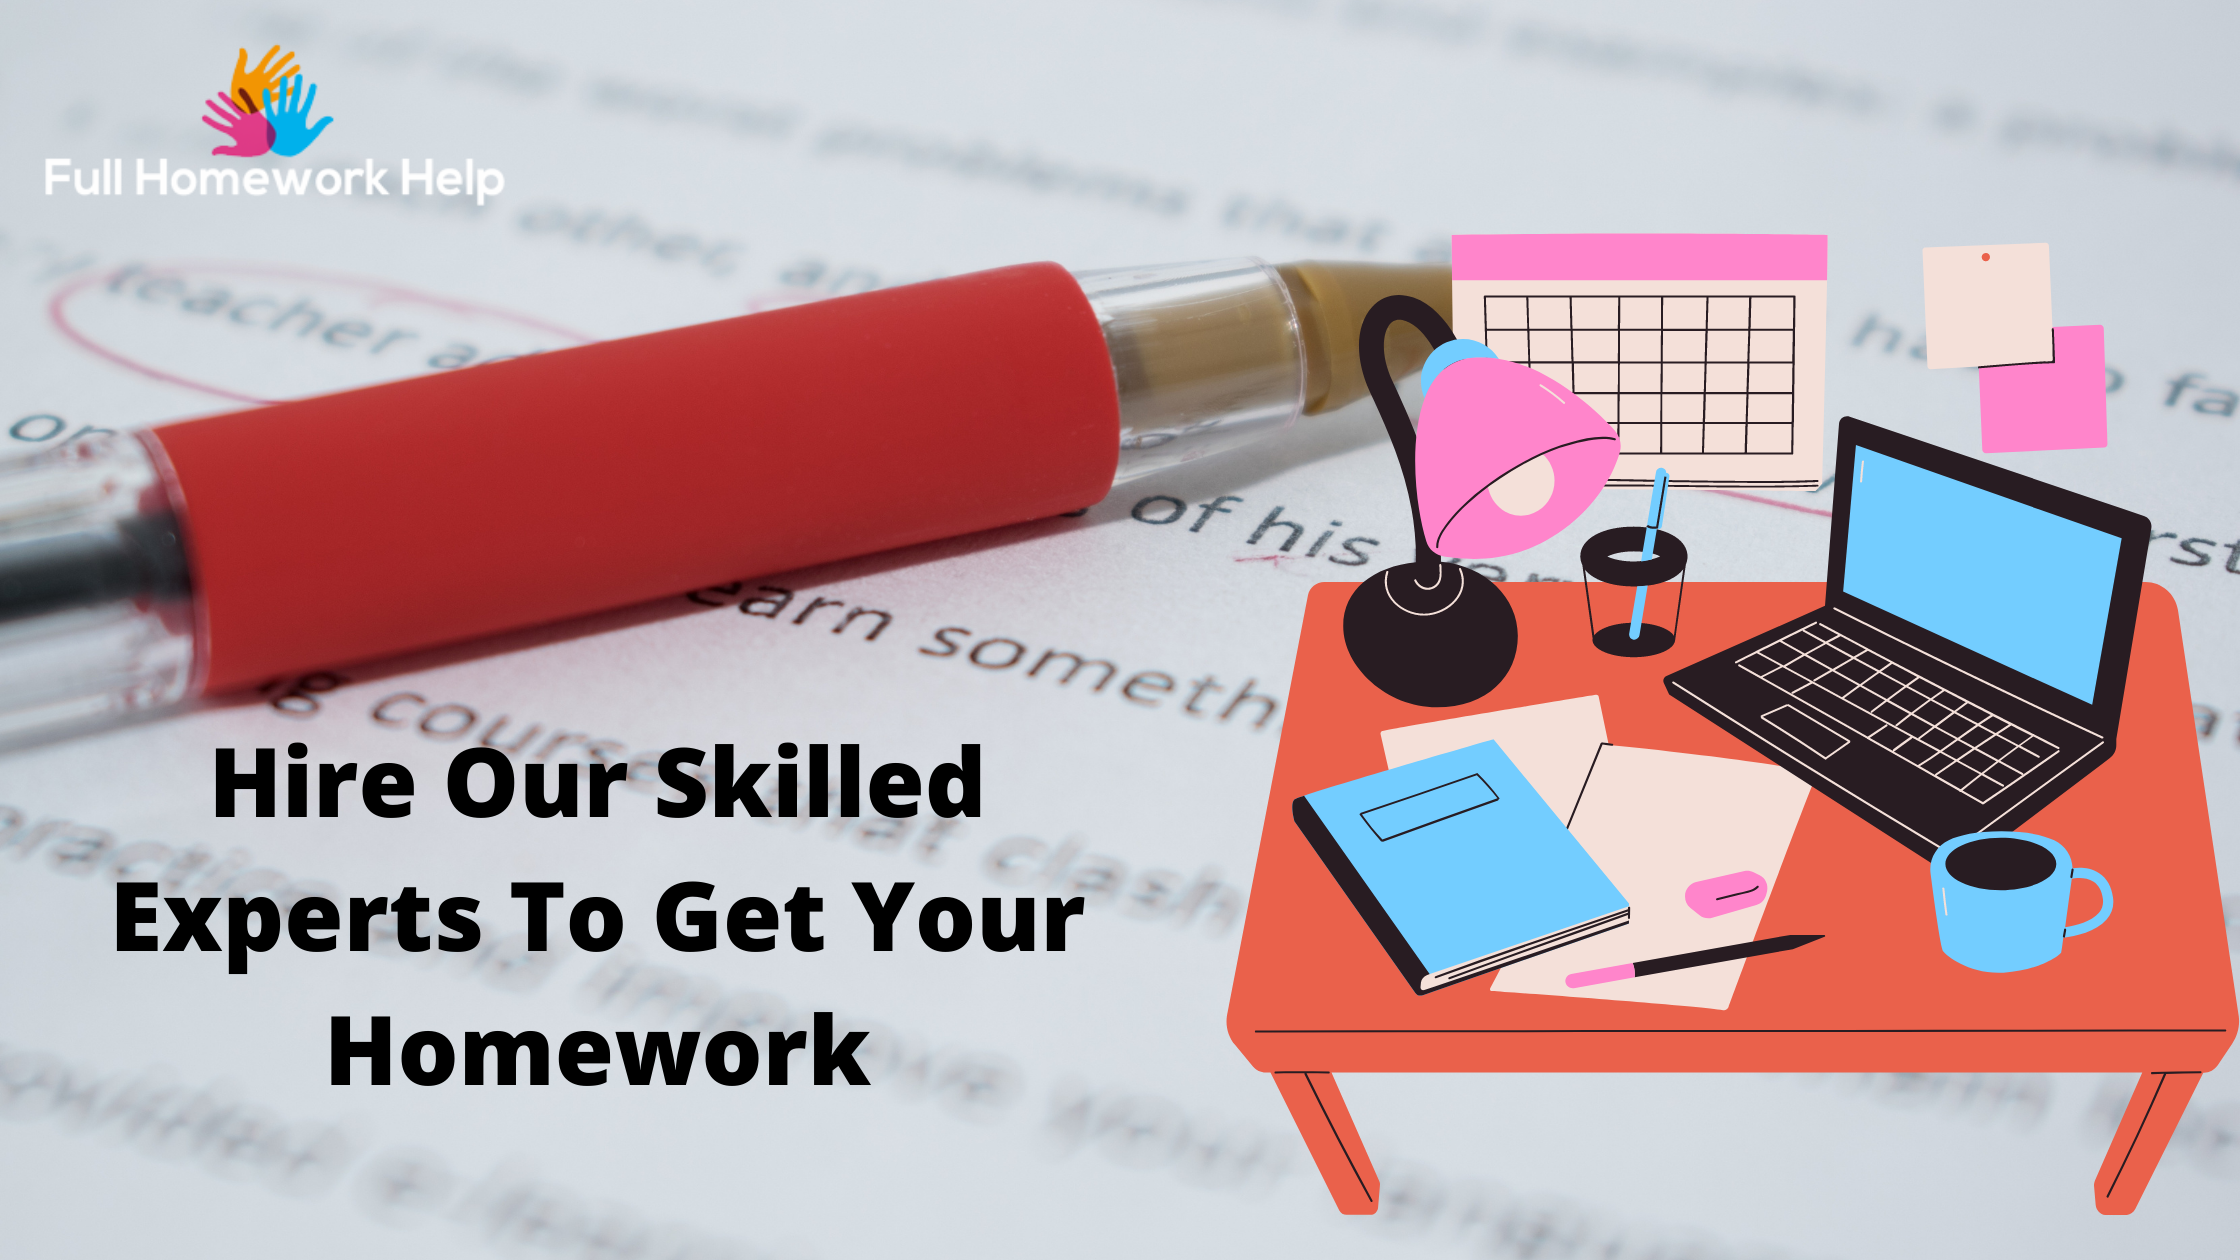 Hire Our Skilled Experts To Get Your Homework